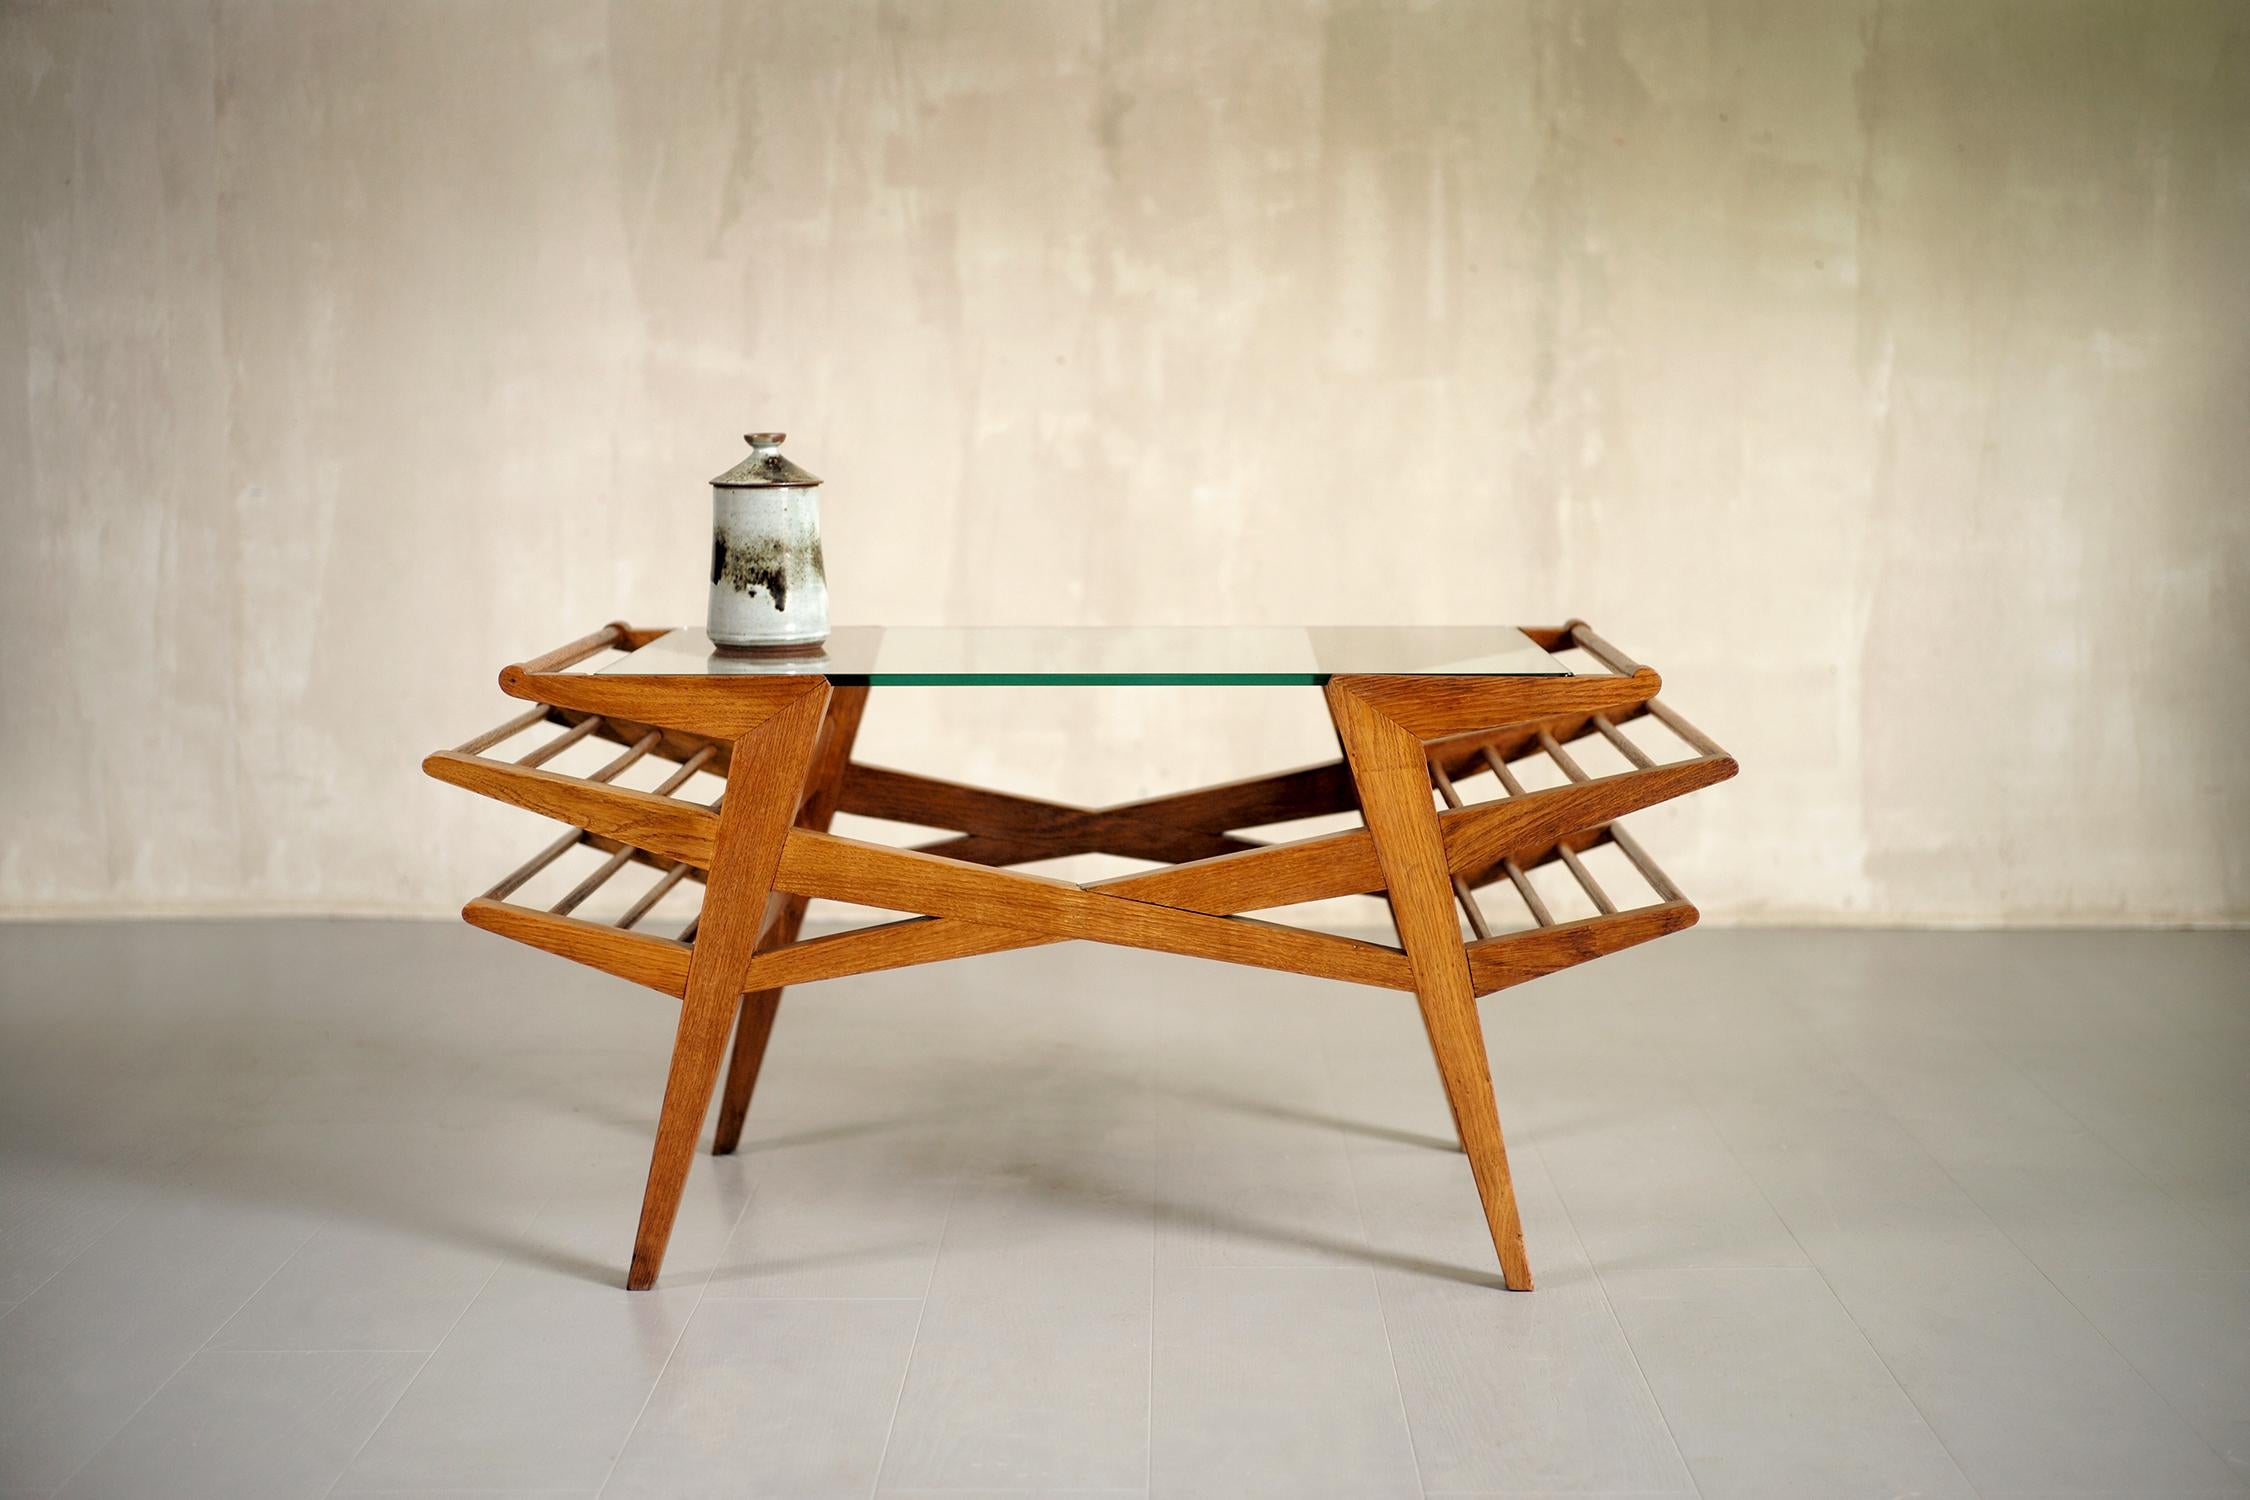 Maxime Old (1910-1991), Oak coffee table, France 1950.
Elegance and rationality are the hallmarks of Maxime Old's work. Produced during the Reconstruction period, this superb table demonstrates all its creativity and high standards.